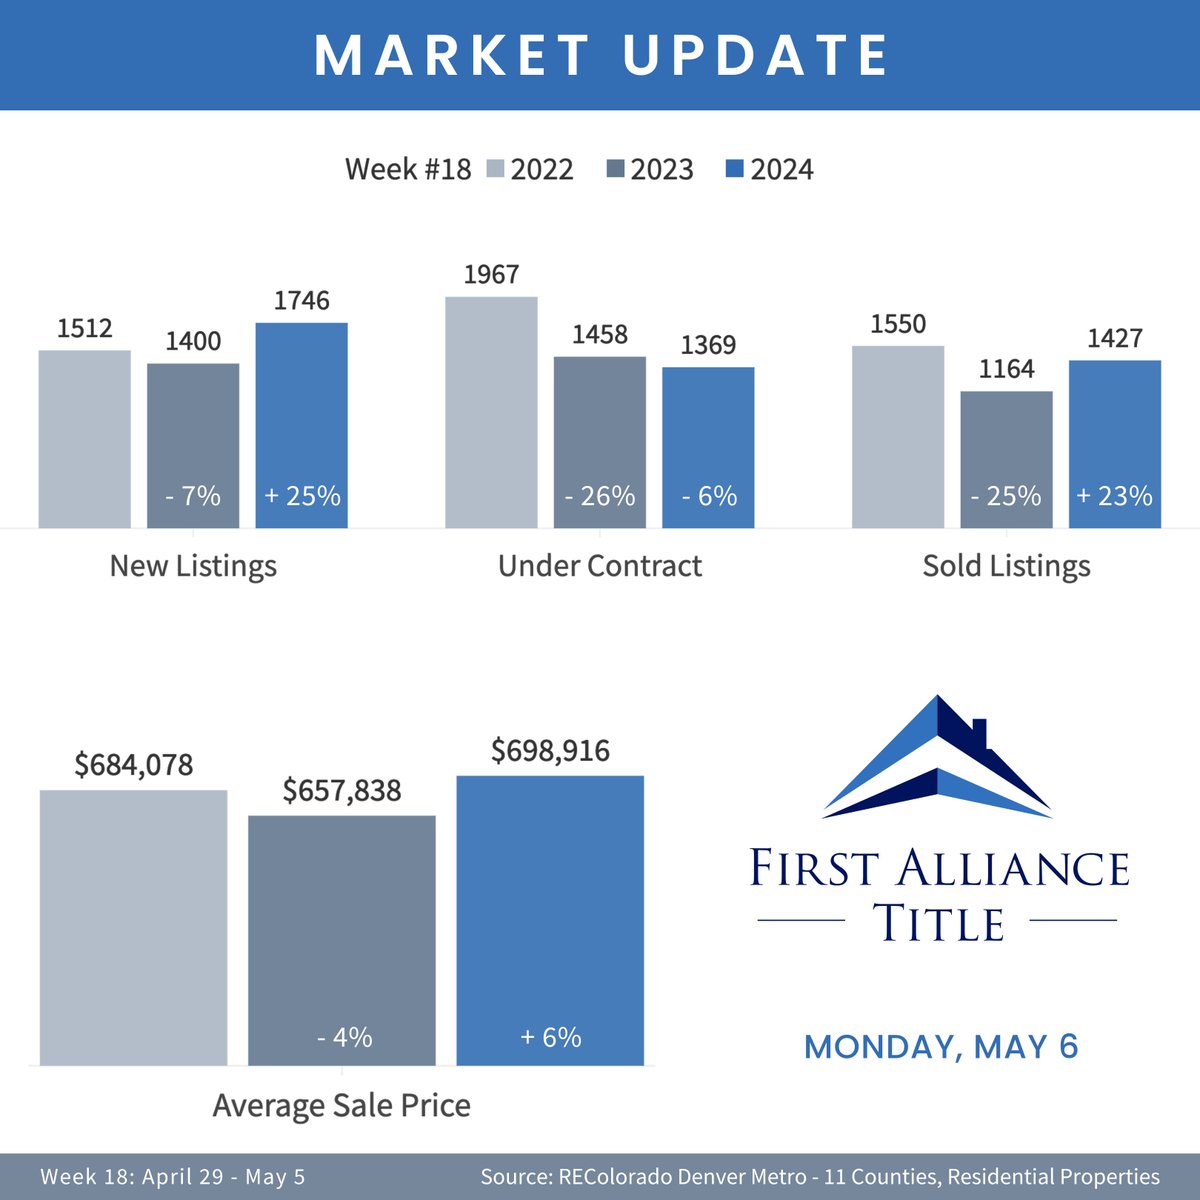 📊 It’s Monday, May 6 - Here are the Weekly Denver Metro Real Estate Numbers.

See where we’ve been and where we’re headed — check out the 17-week graphs - firstalliancetitle.com/weekly-market-… 

#denverrealestate #boulderrealestate
#denverbroker #boulderbroker #denverrealtor #denverinvestors